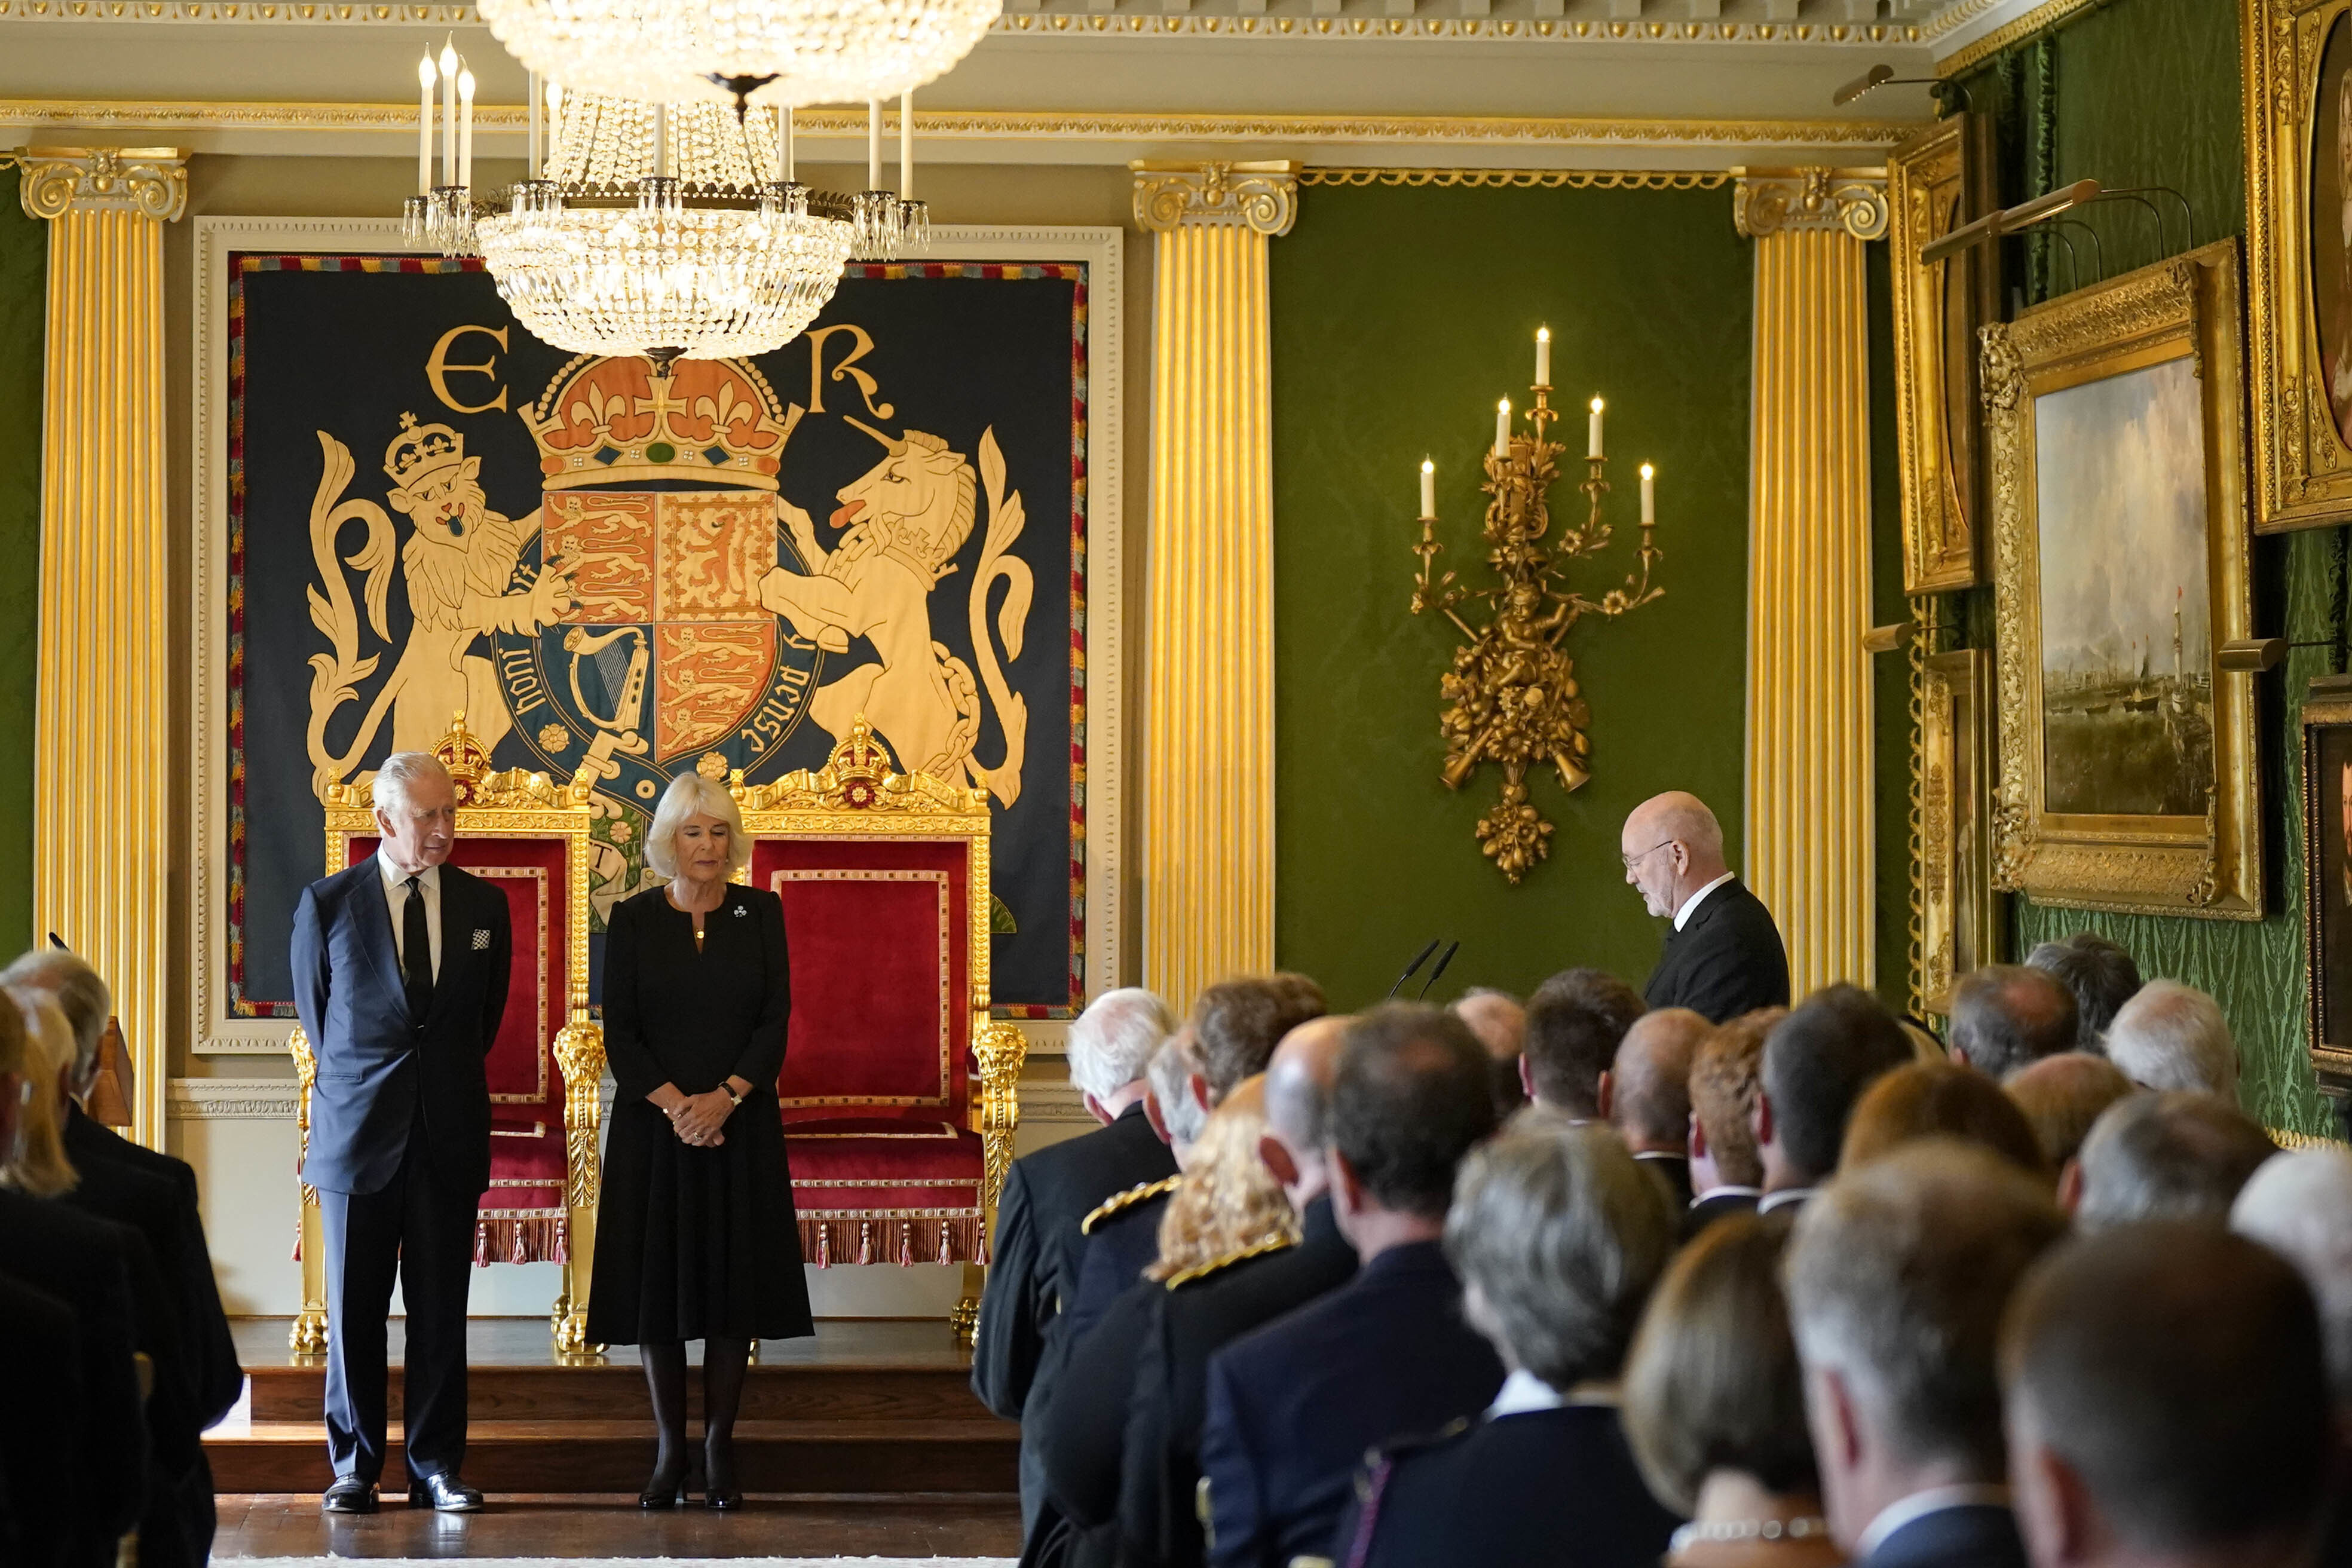 <p>King Charles III and Camilla, Queen Consort listened to a message of condolence from Speaker of the Northern Ireland Assembly Alex Maskey at Hillsborough Castle in Belfast, Northern Ireland, five days after <a href="https://www.wonderwall.com/celebrity/celebrities-dignitaries-react-to-death-of-queen-elizabeth-ii-647756.gallery">the death</a> of Queen Elizabeth II. The couple visited the U.K. nation on the same day the queen's coffin was flown to London from Scotland, where she died at her summer home, Balmoral.</p>